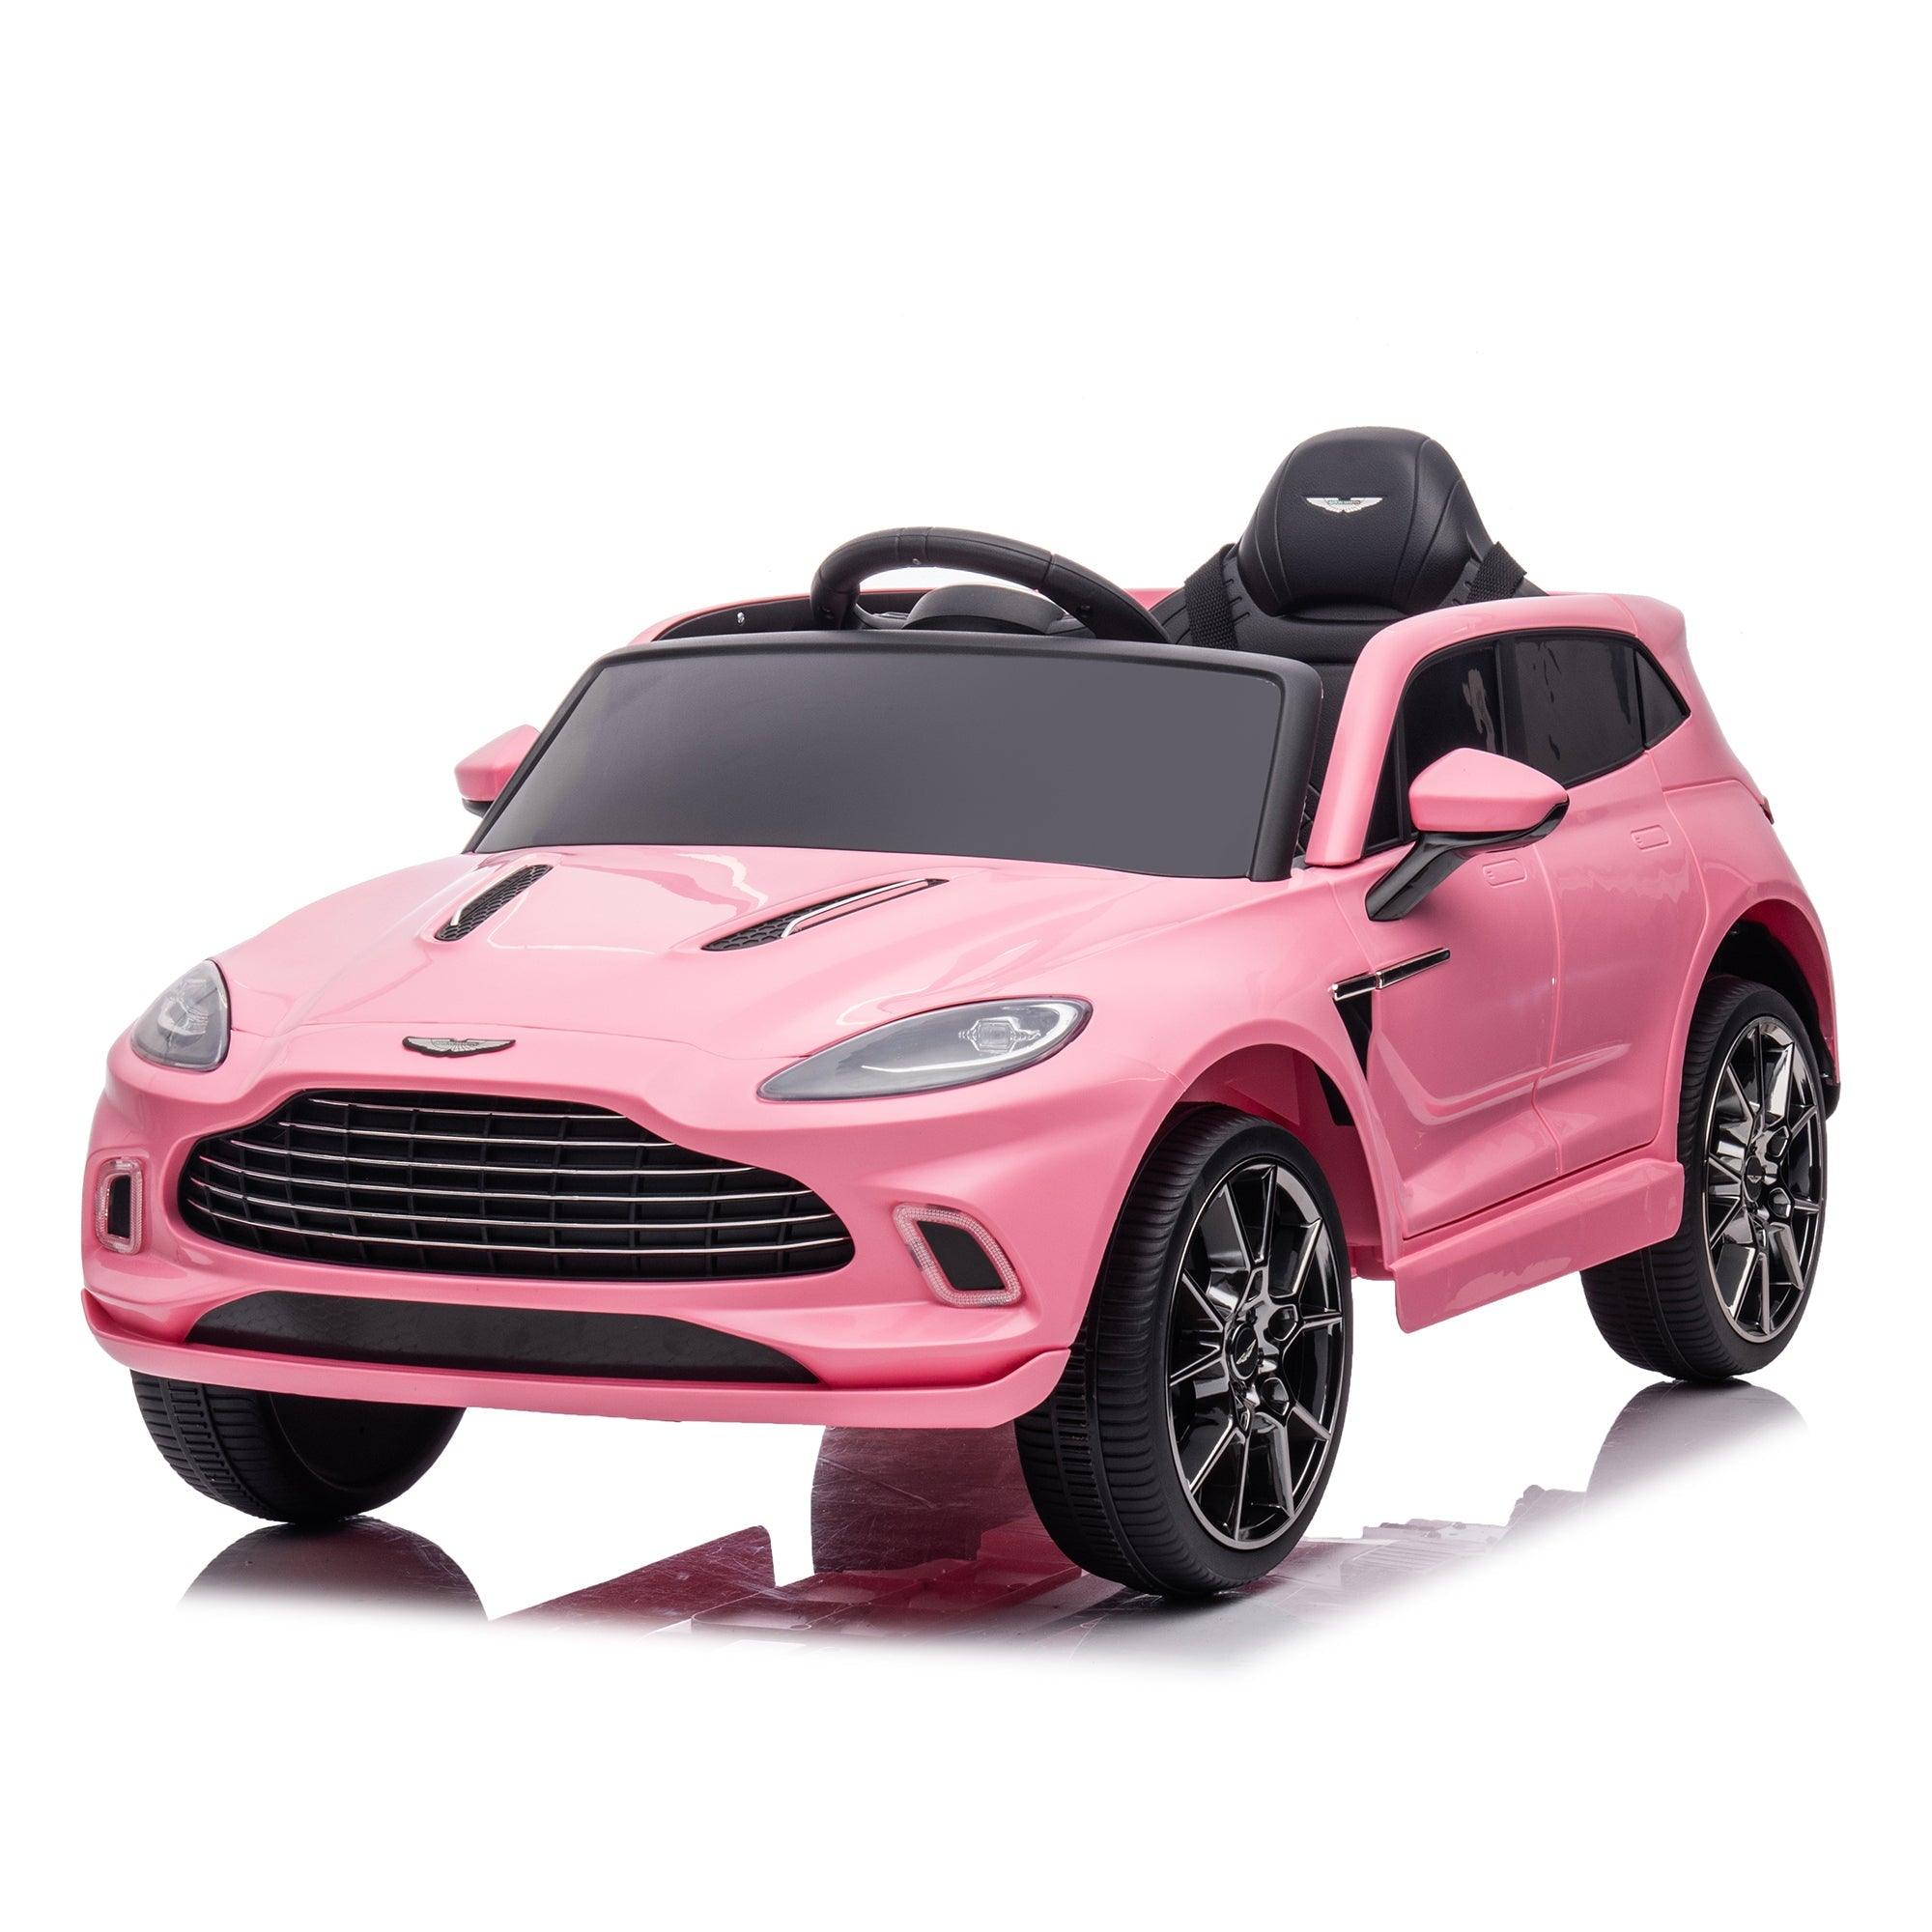 12V Dual-Drive Kids Ride-On Car Remote Control Electric Battery Powered, Music, USB, Pink LamCham